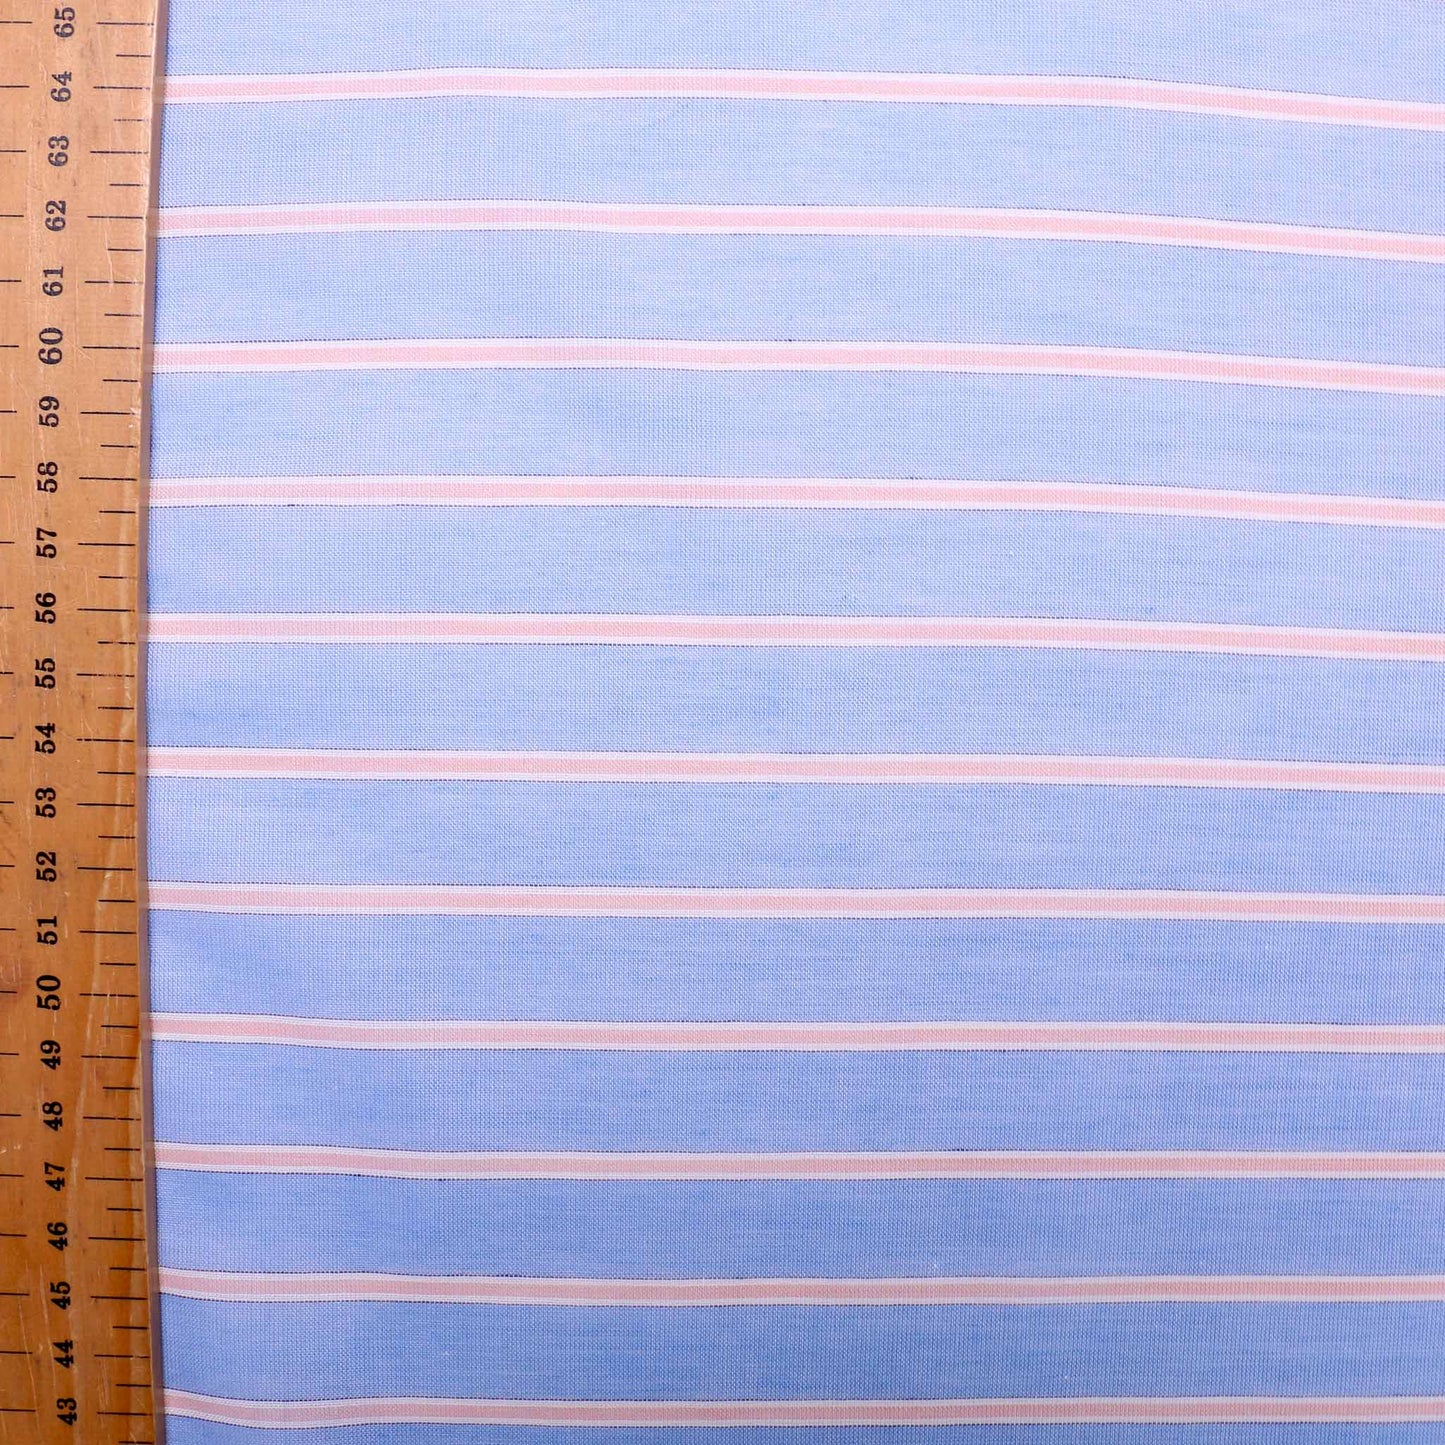 metre cotton lawn voile dressmaking fabric with pink stripes on blue base